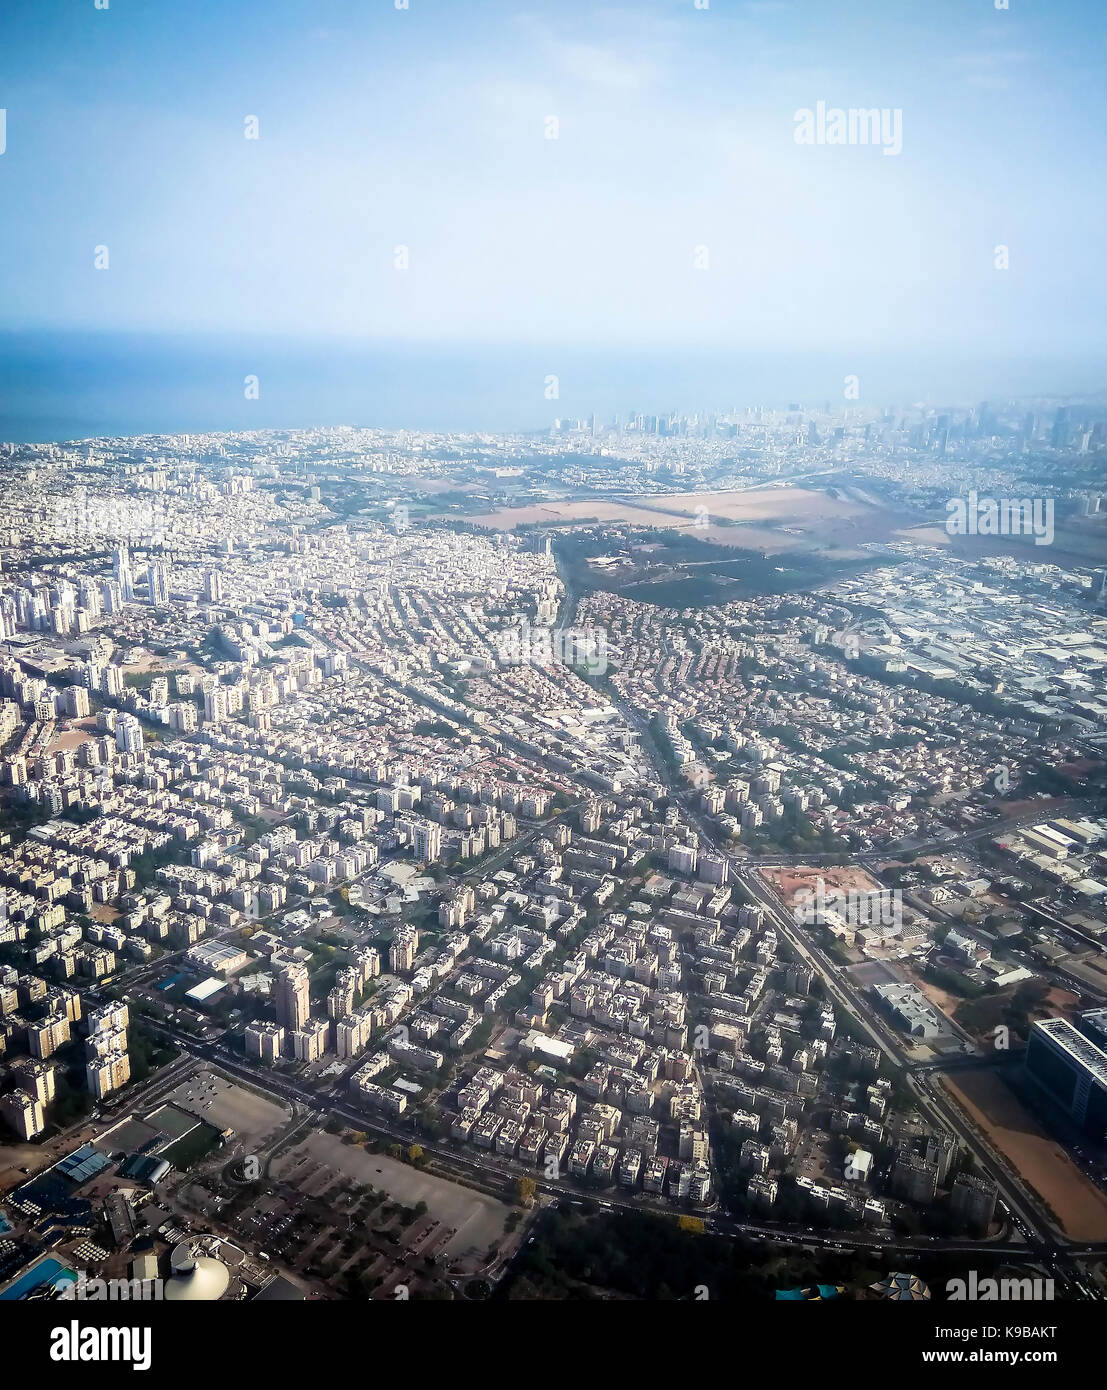 View of Tel Aviv and the Mediterranean Sea from the window of the plane taking off from the airport Ben Gurion Stock Photo